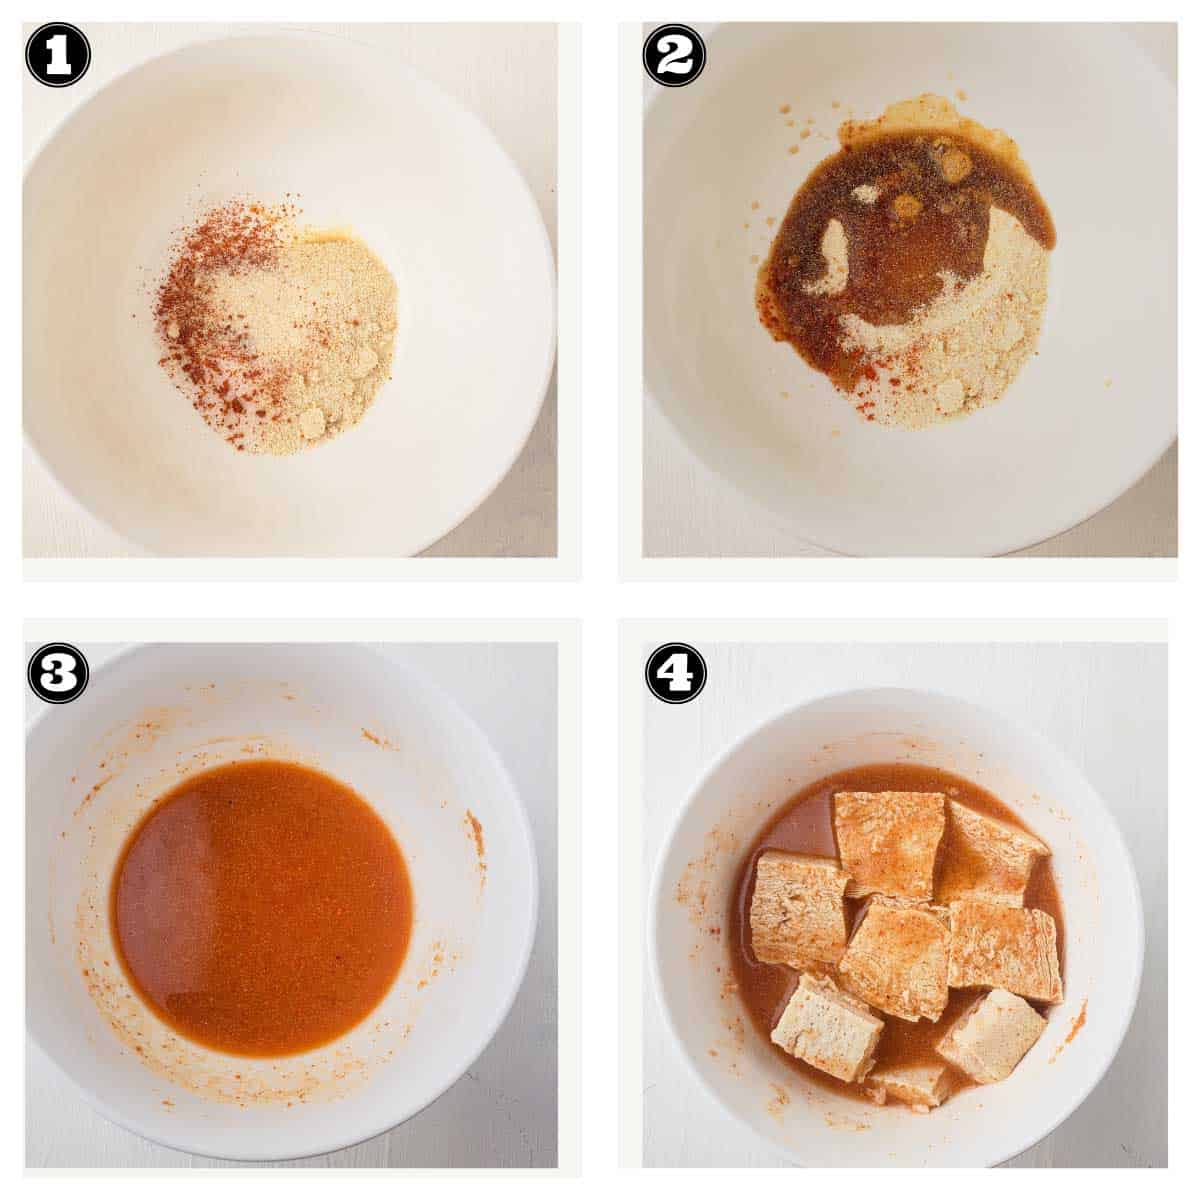 steps involved in making marinade